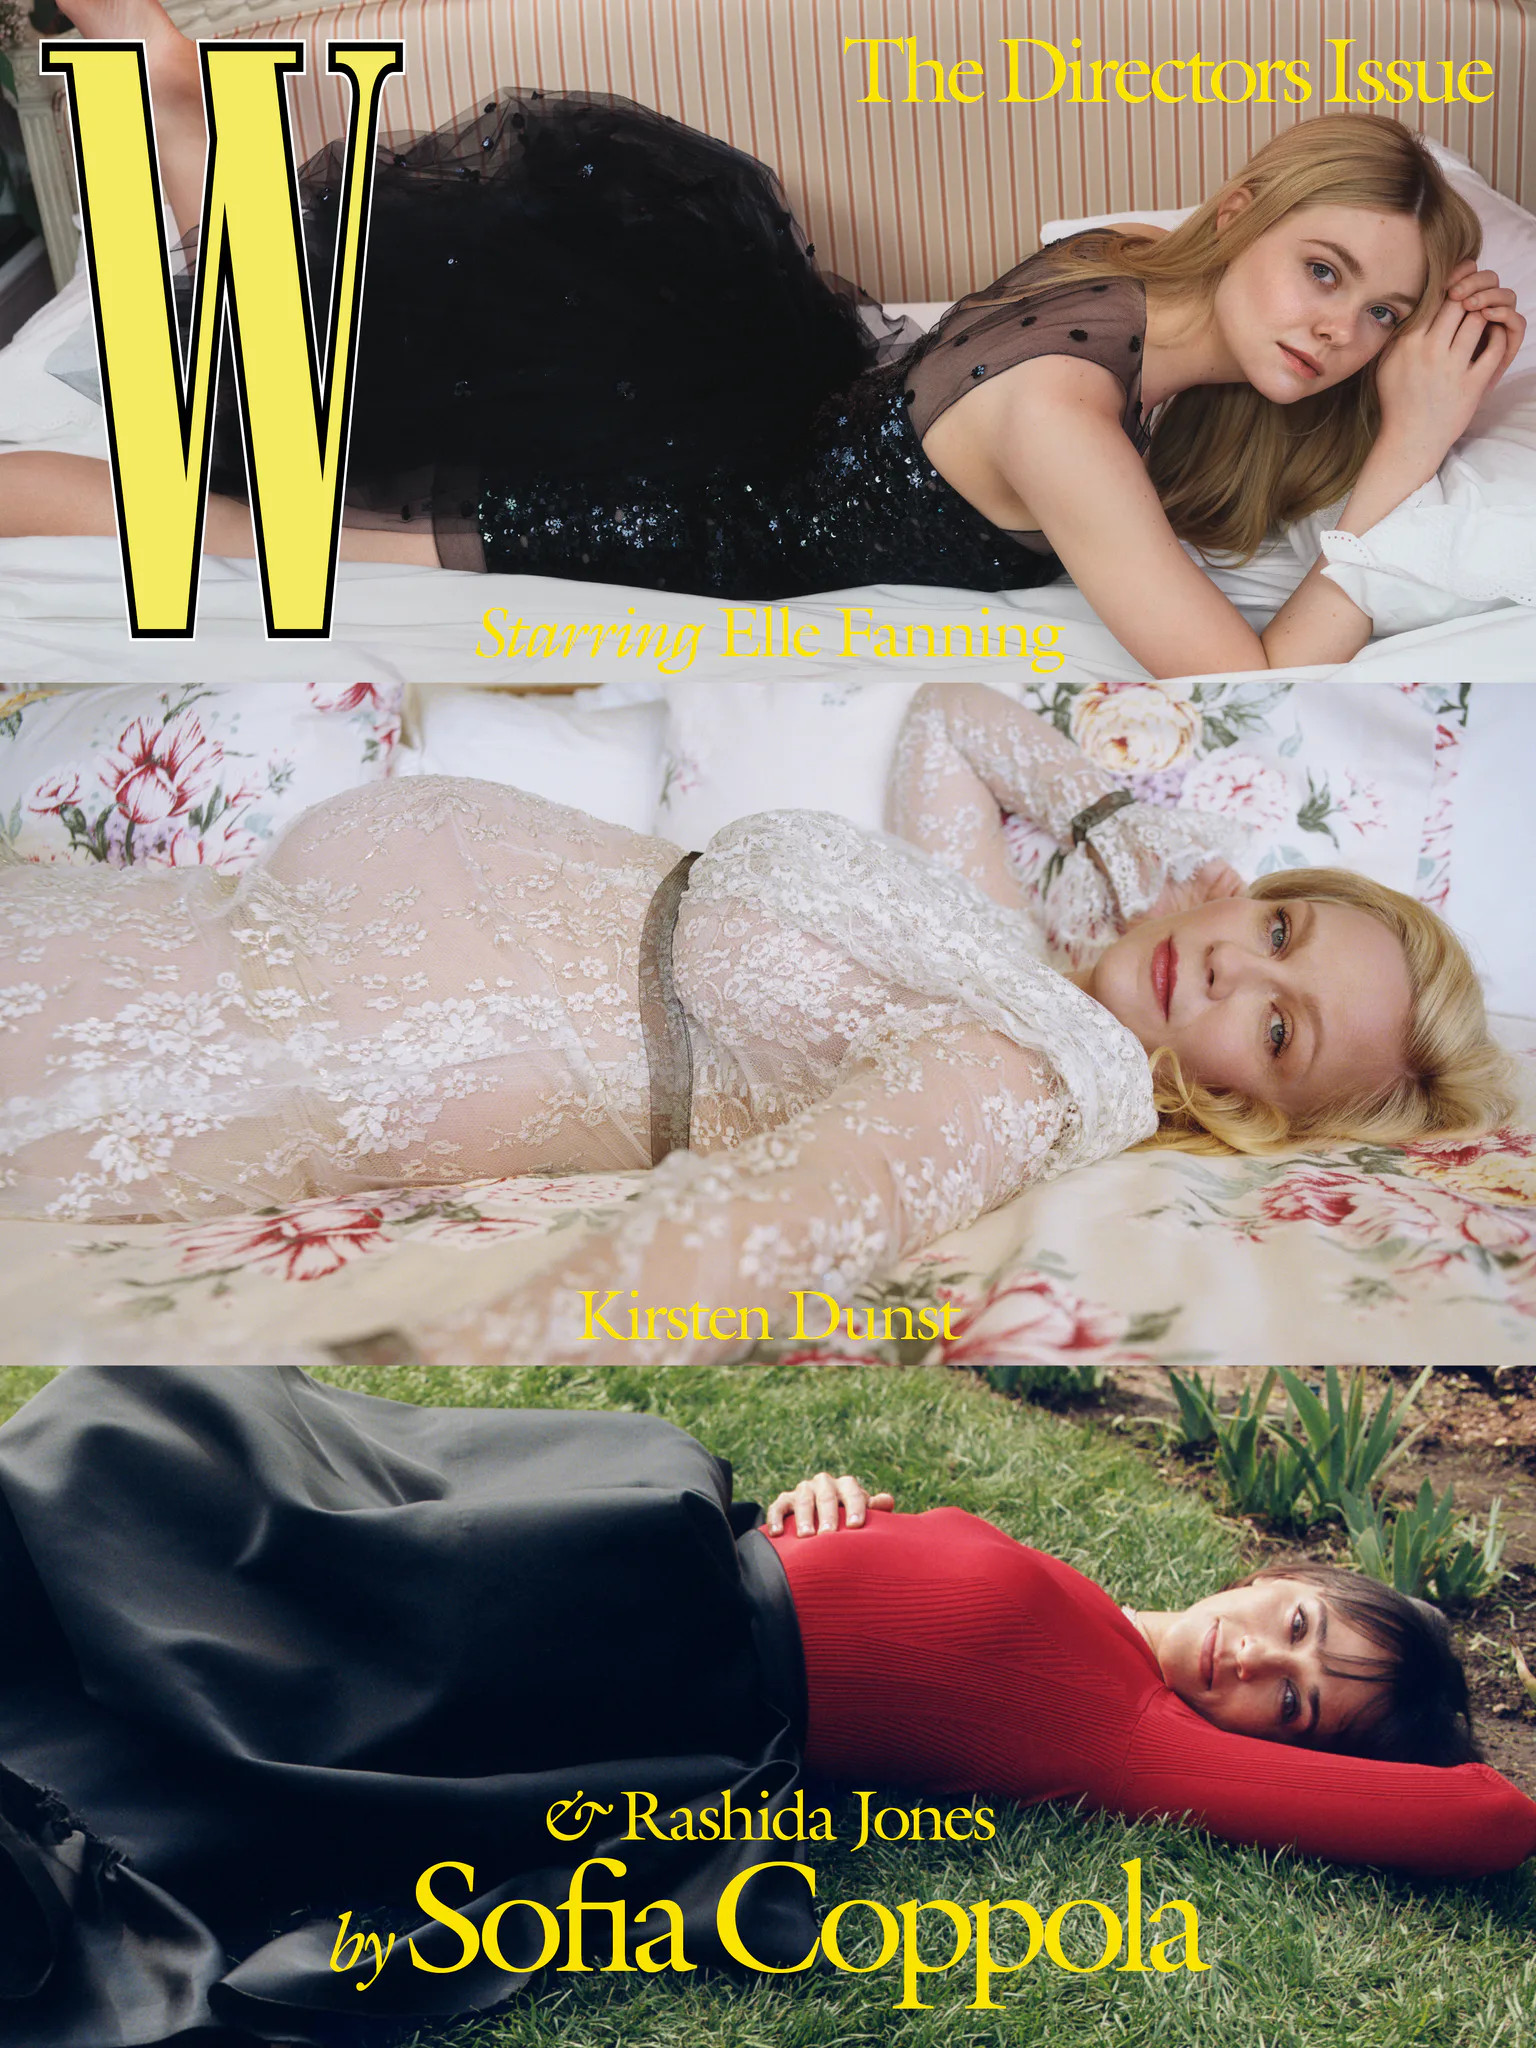 The cover of W Magazine